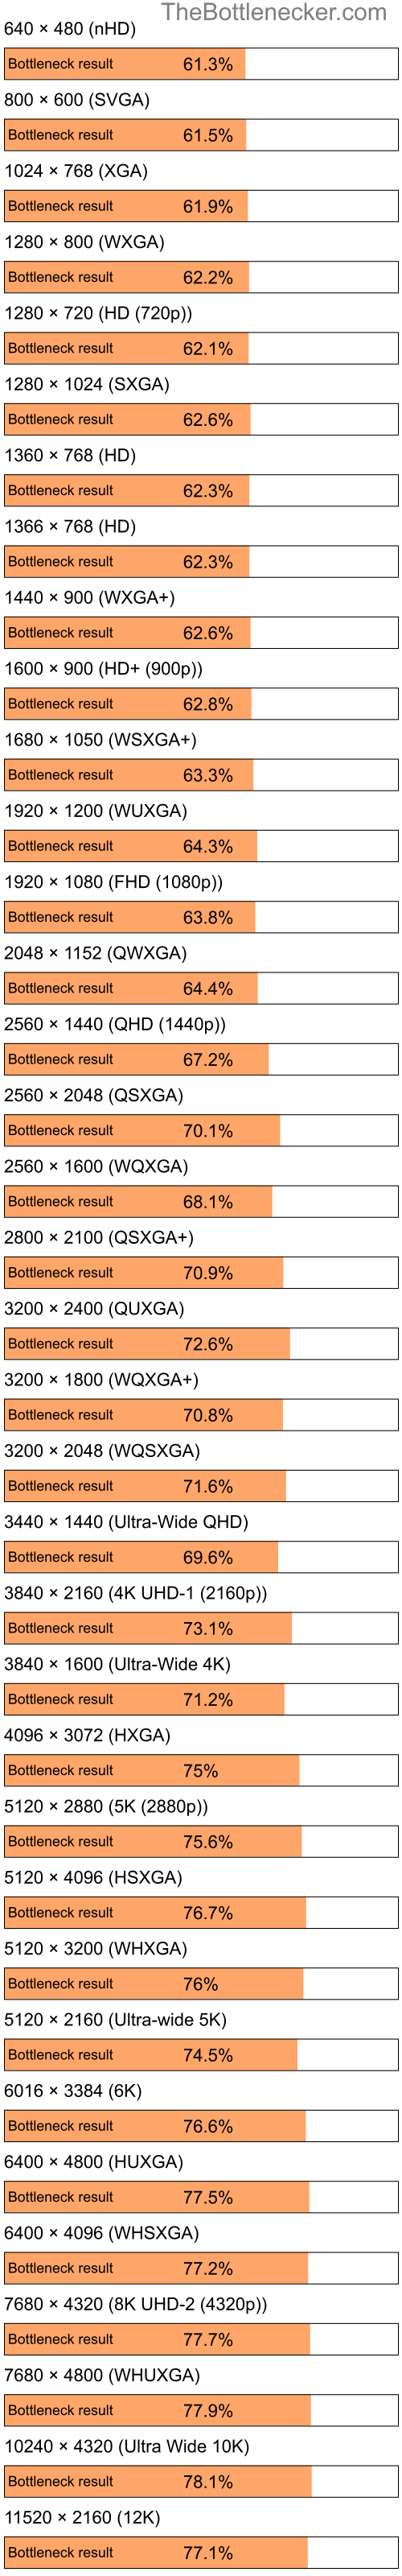 Bottleneck results by resolution for Intel Celeron and NVIDIA Quadro FX 570M in General Tasks